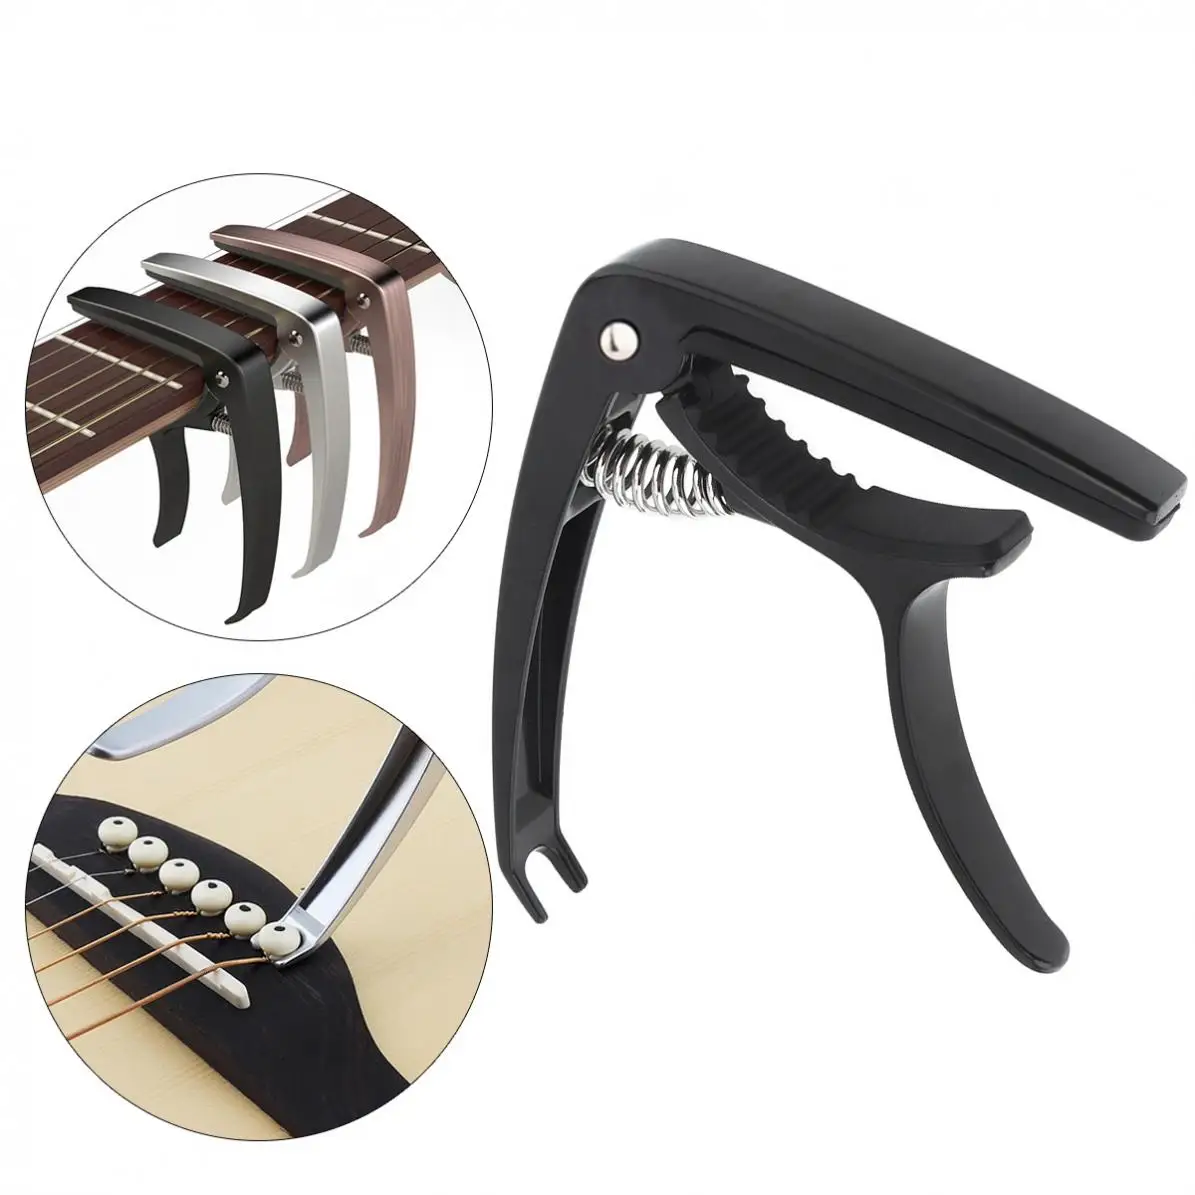 

Black Silver Bronze Zinc Alloy Metal Guitar Capo with Pin Puller for Guitar Bass Ukulele Tuning 3 Colors Optional